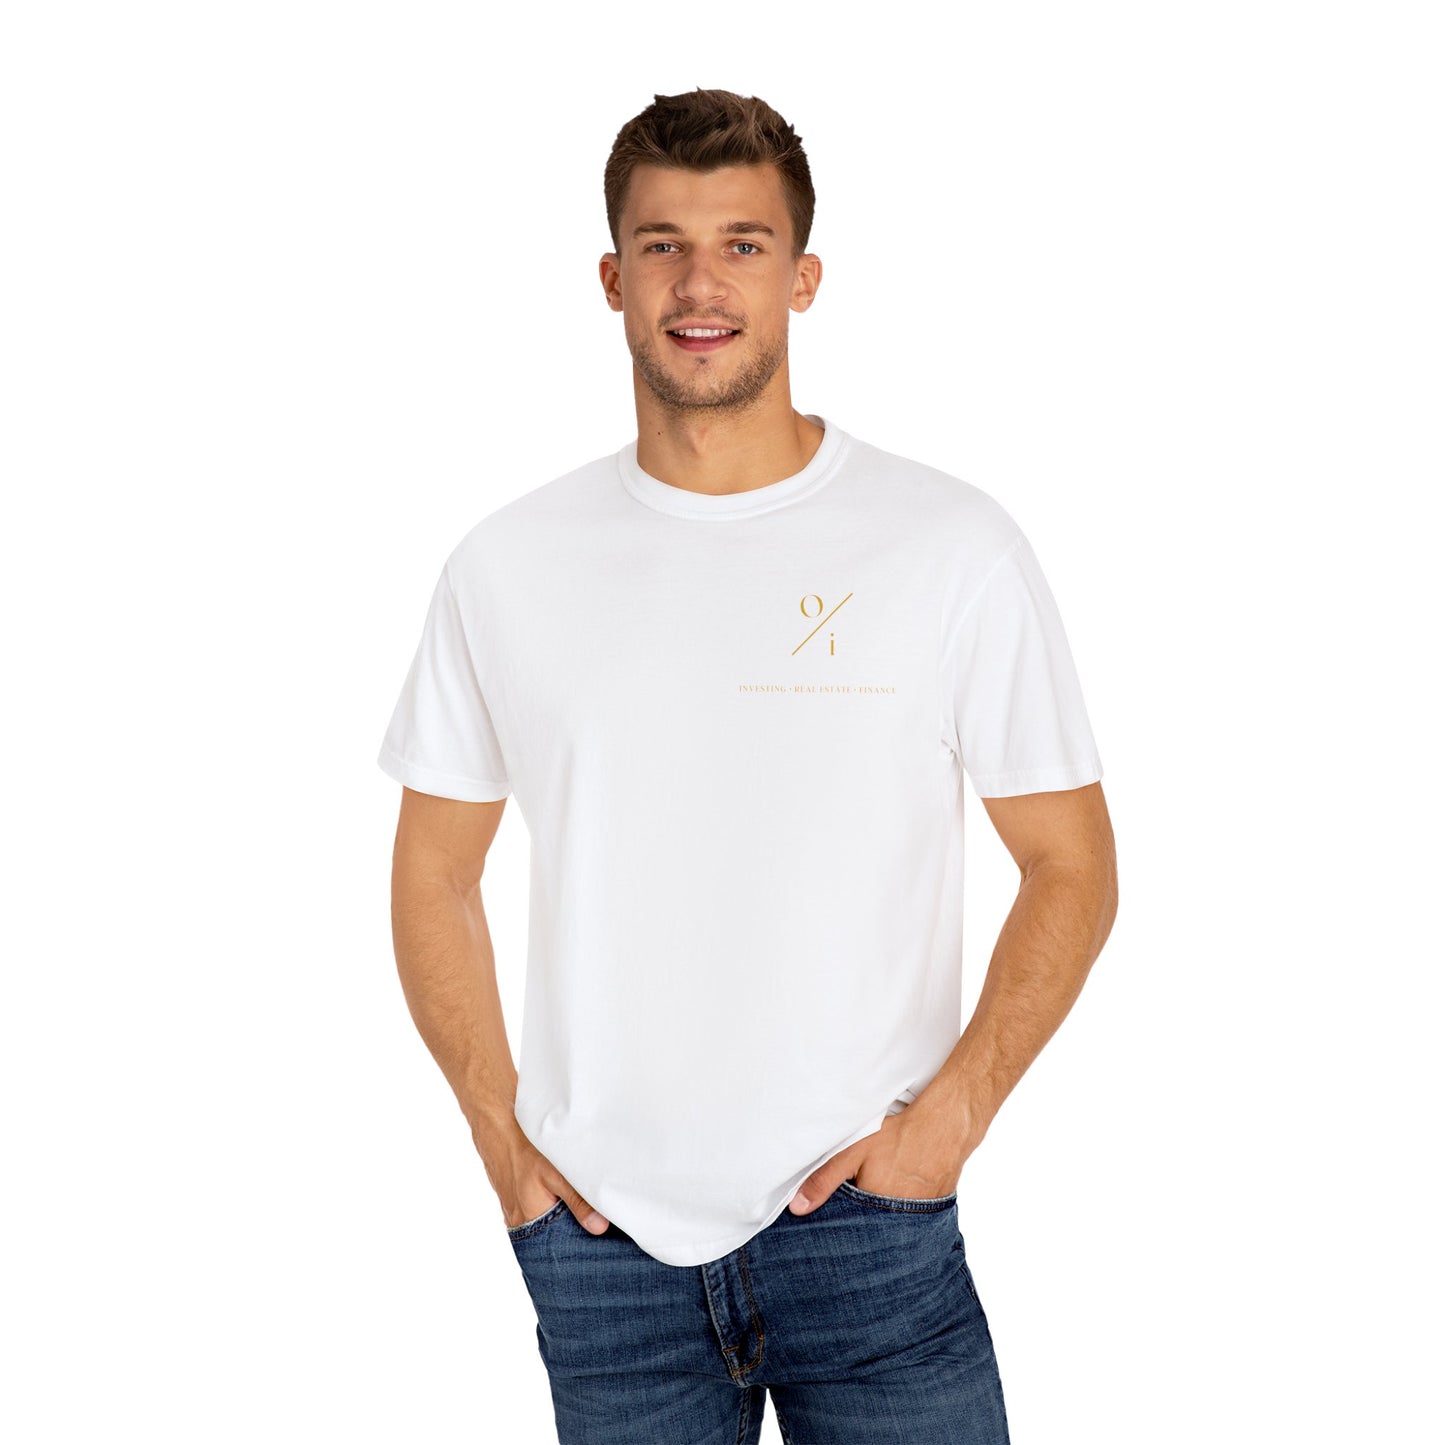 Ongay Investment T-Shirt